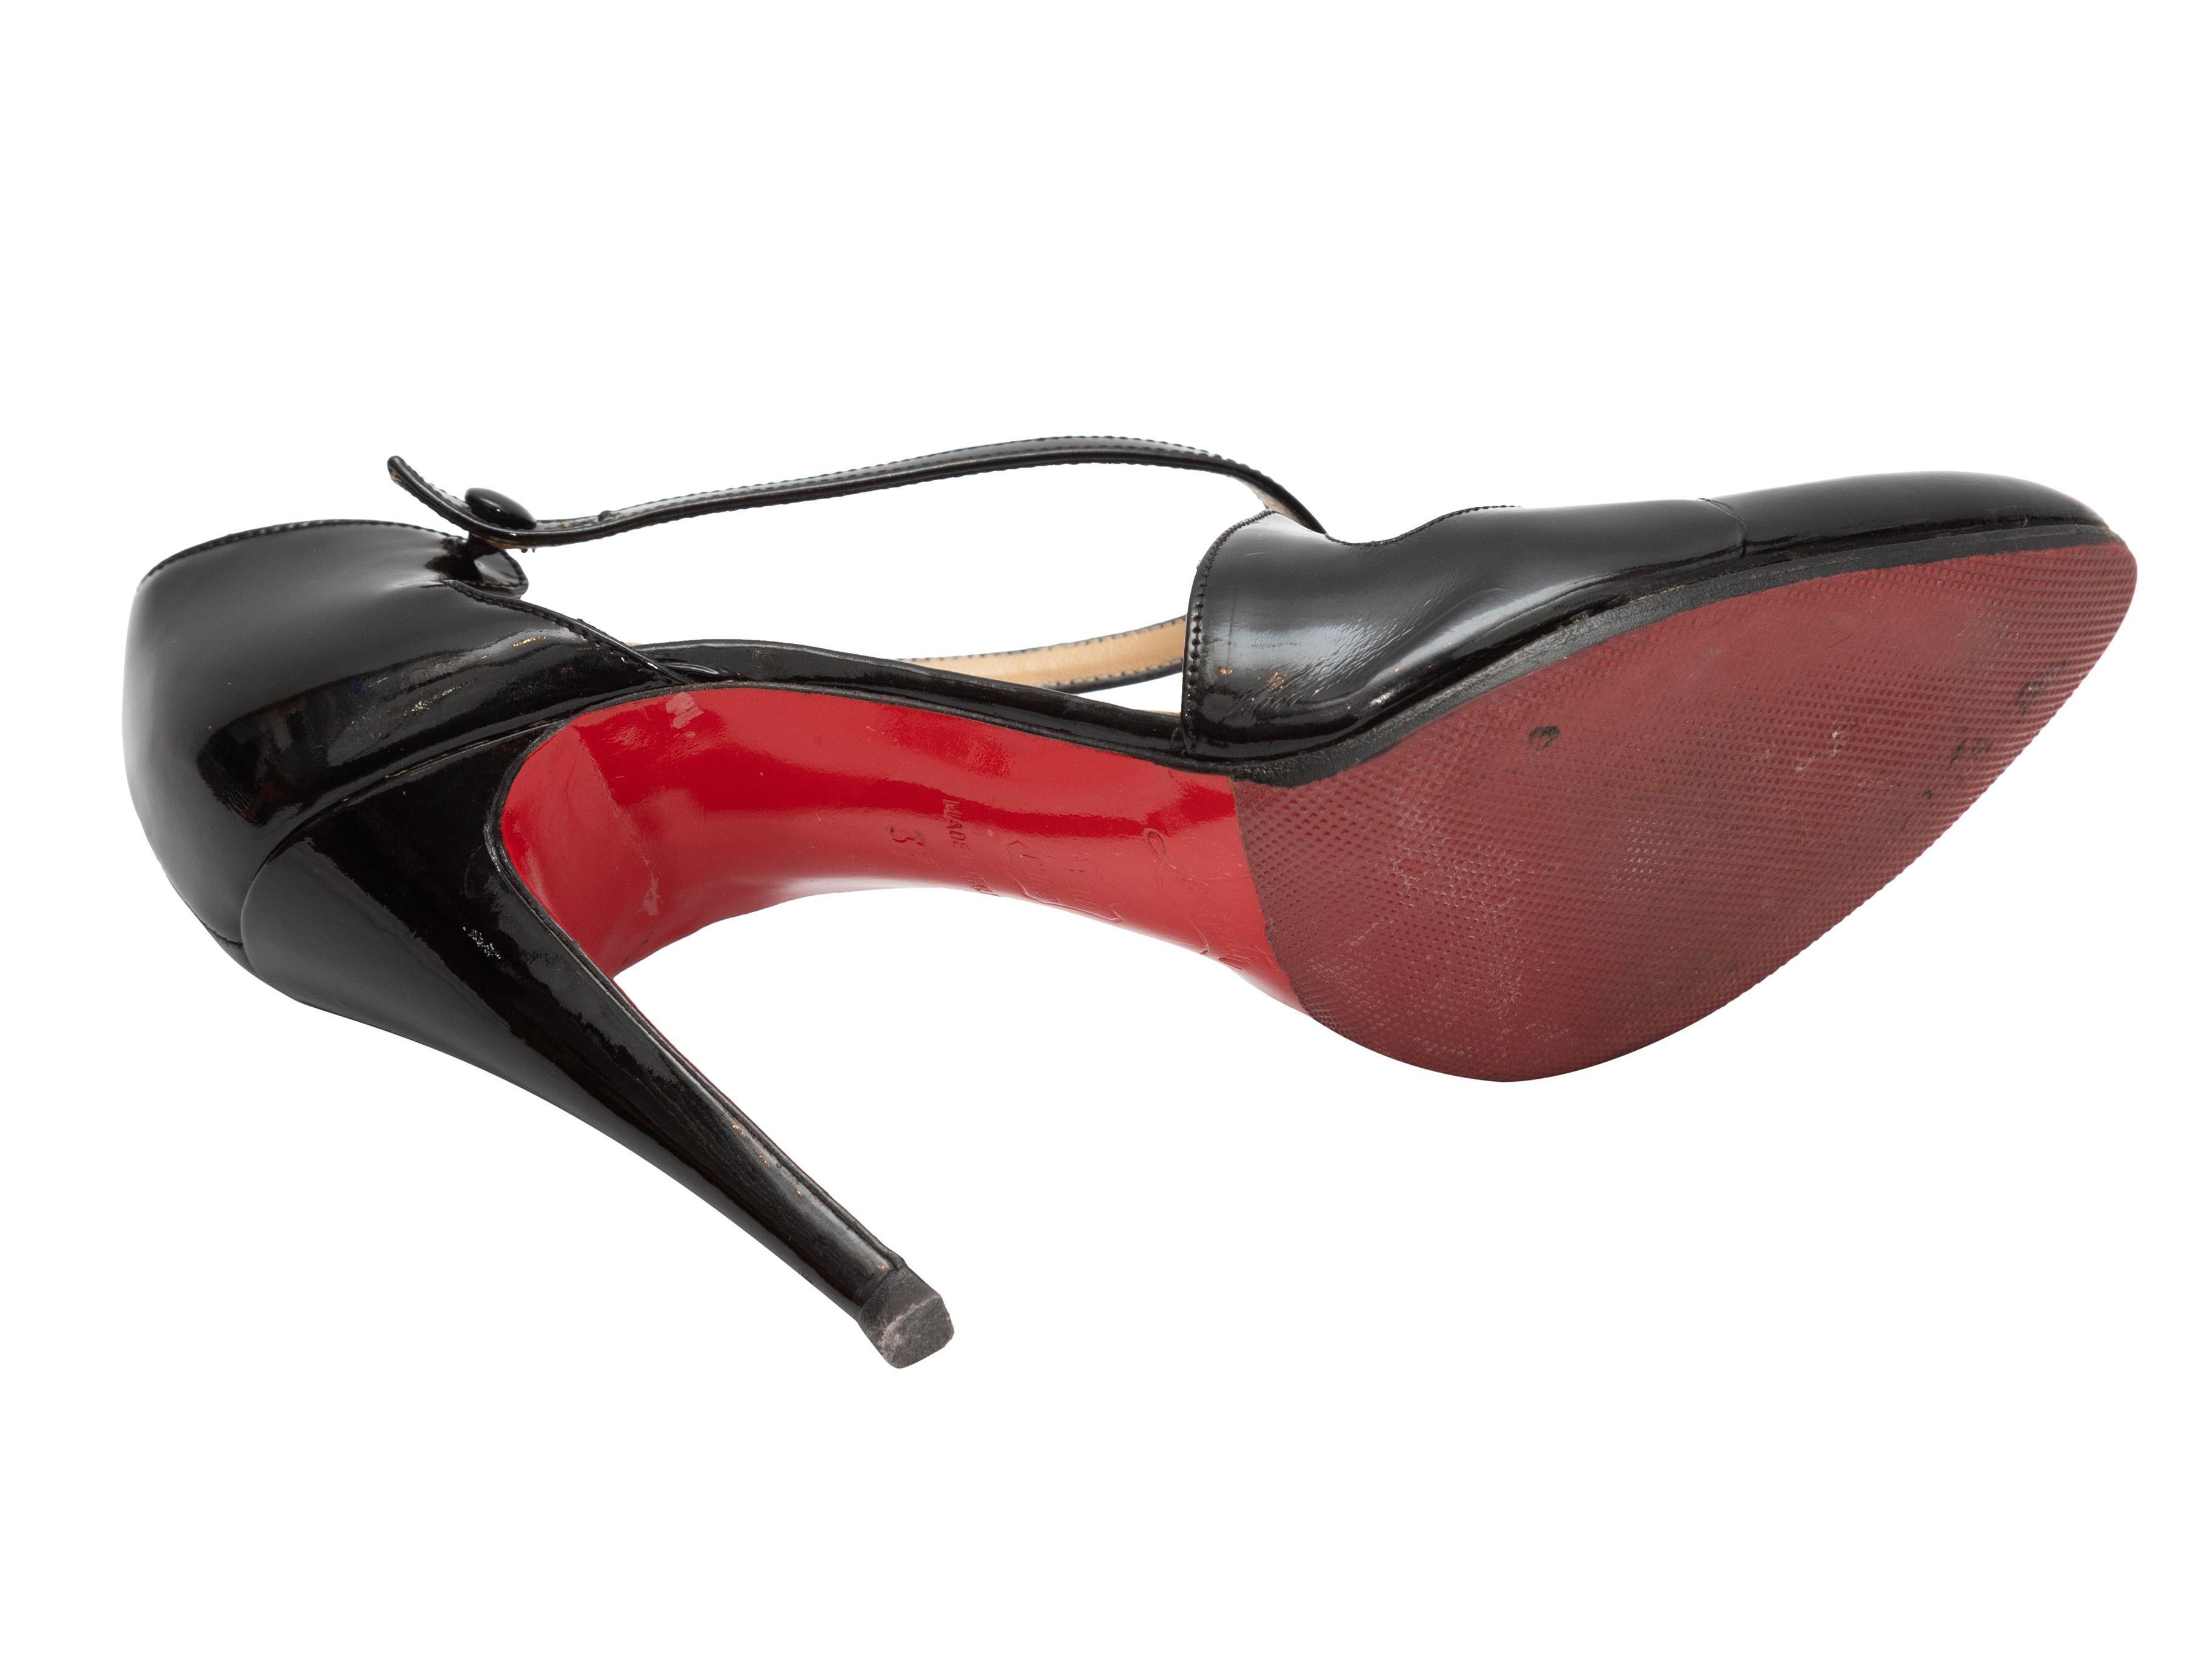 Product Details: Black patent leather criss-cross strap pumps by Christian Louboutin. Button closures at ankle straps. 4